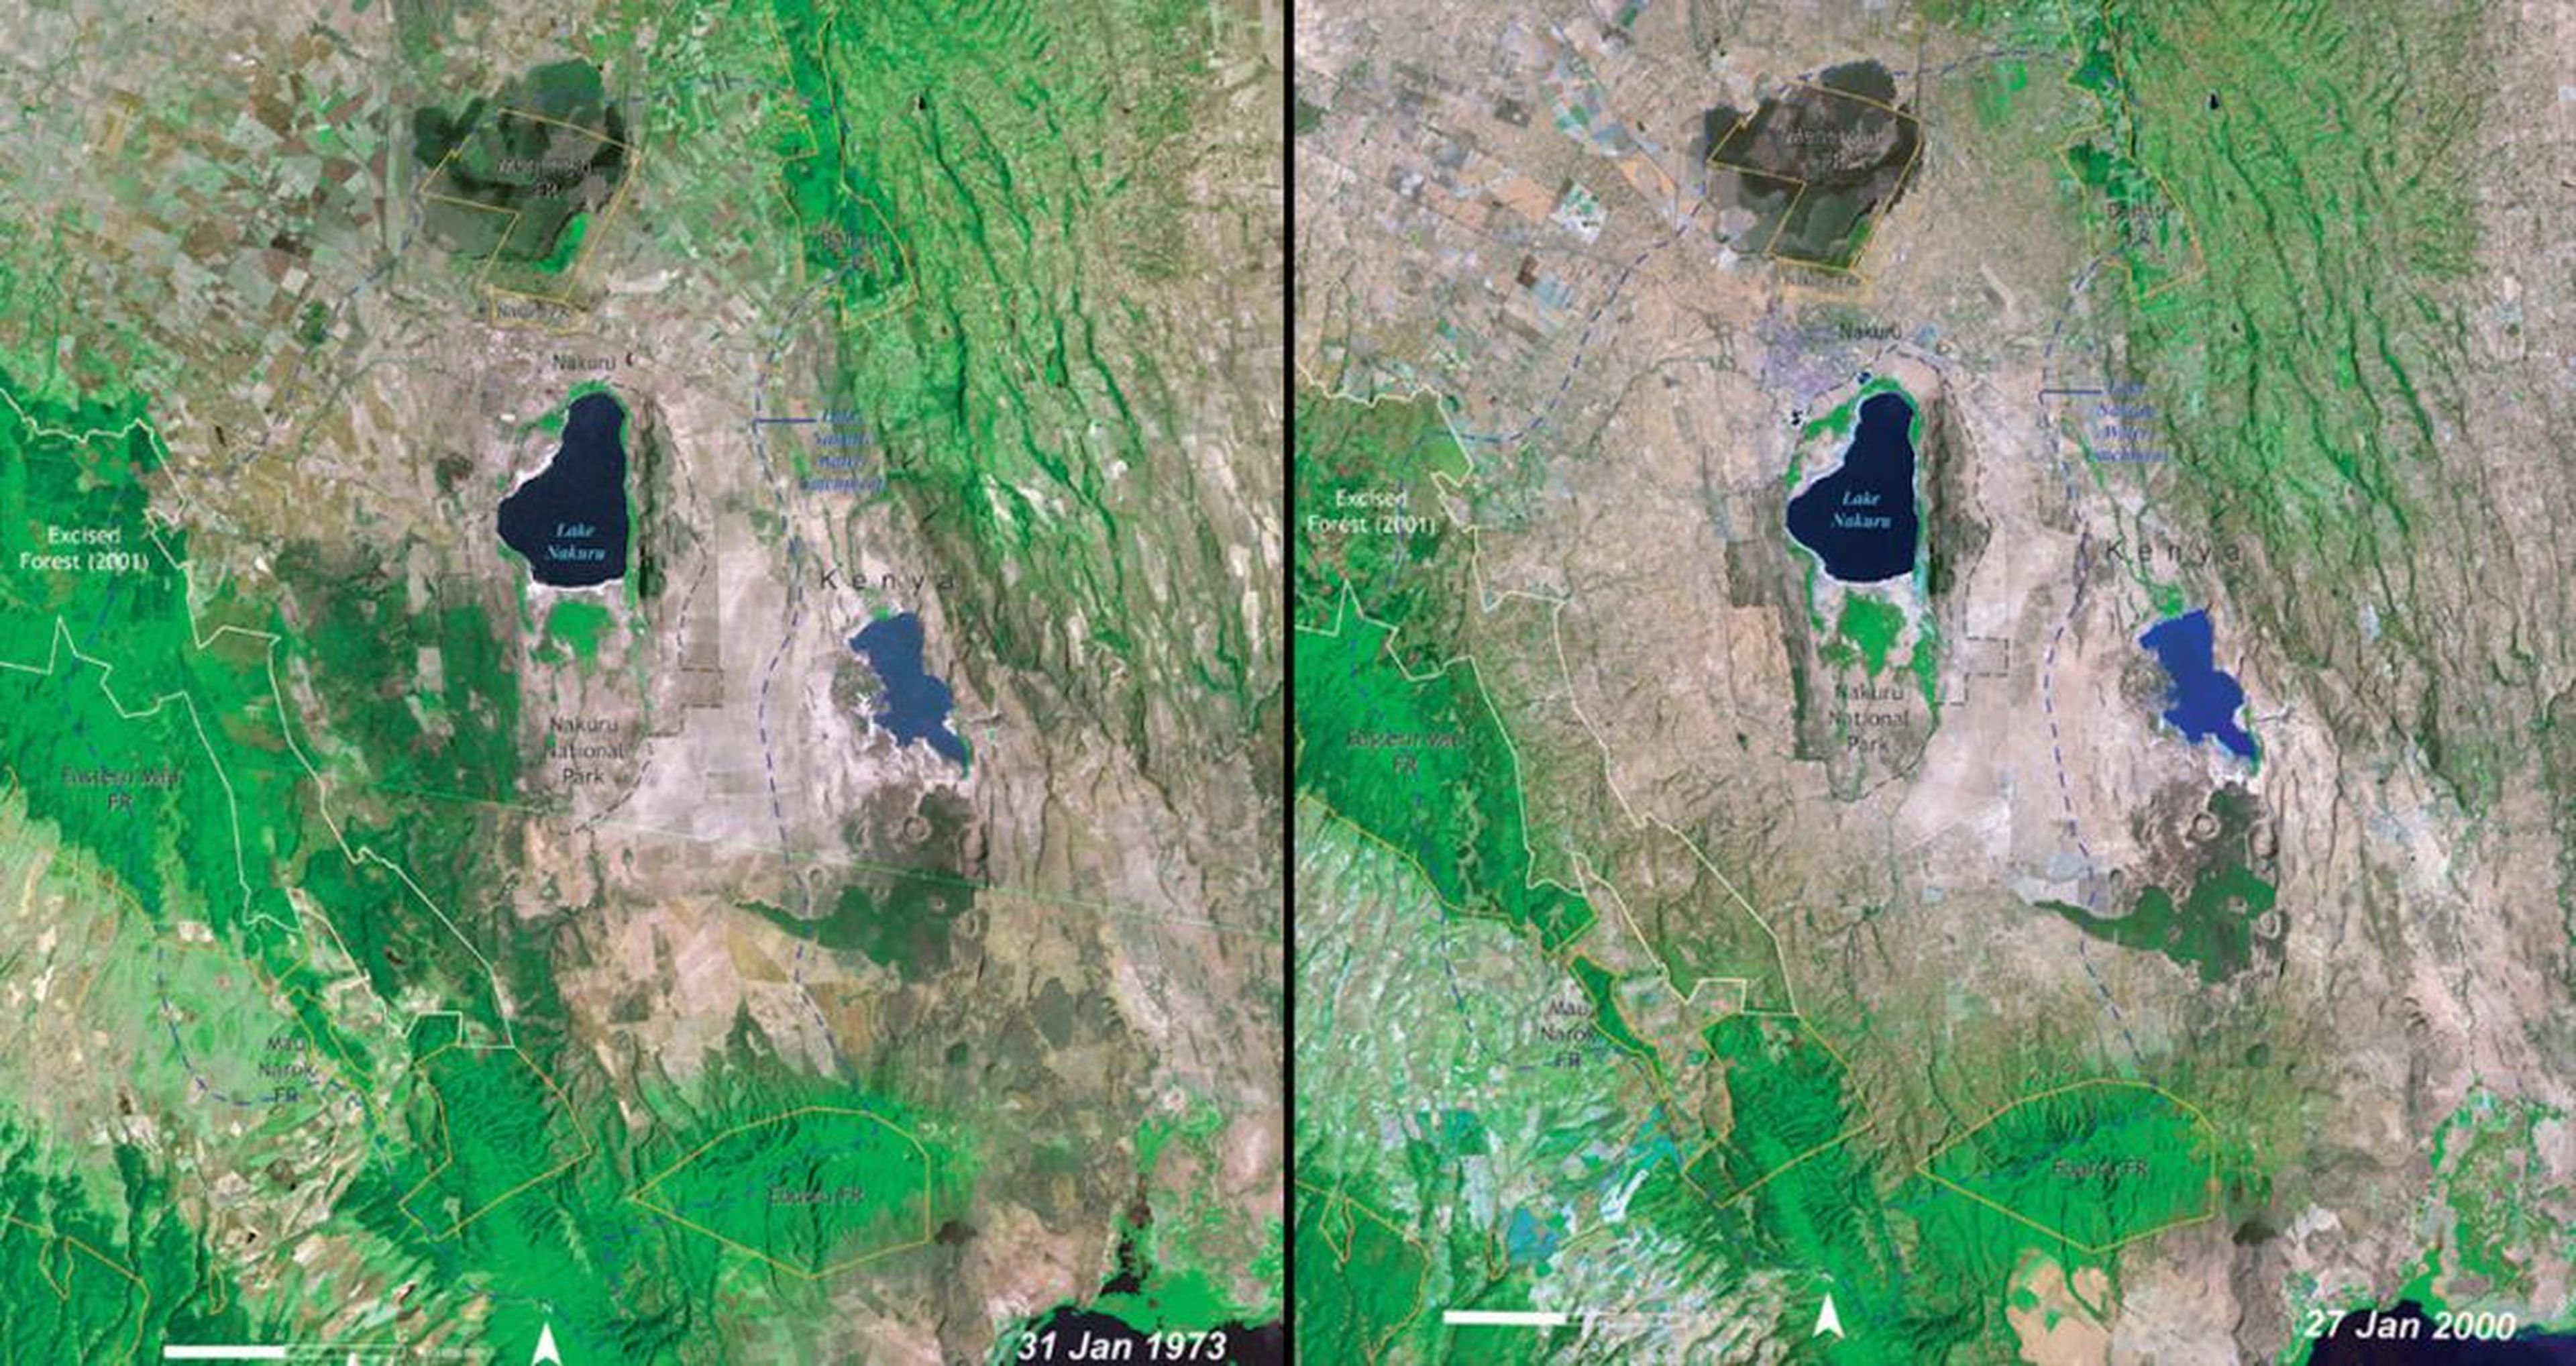 A similar contrast is visible in these images of Kenya's Lake Nakuru National Park, shown here in 1973 (left) and 2000 (right).